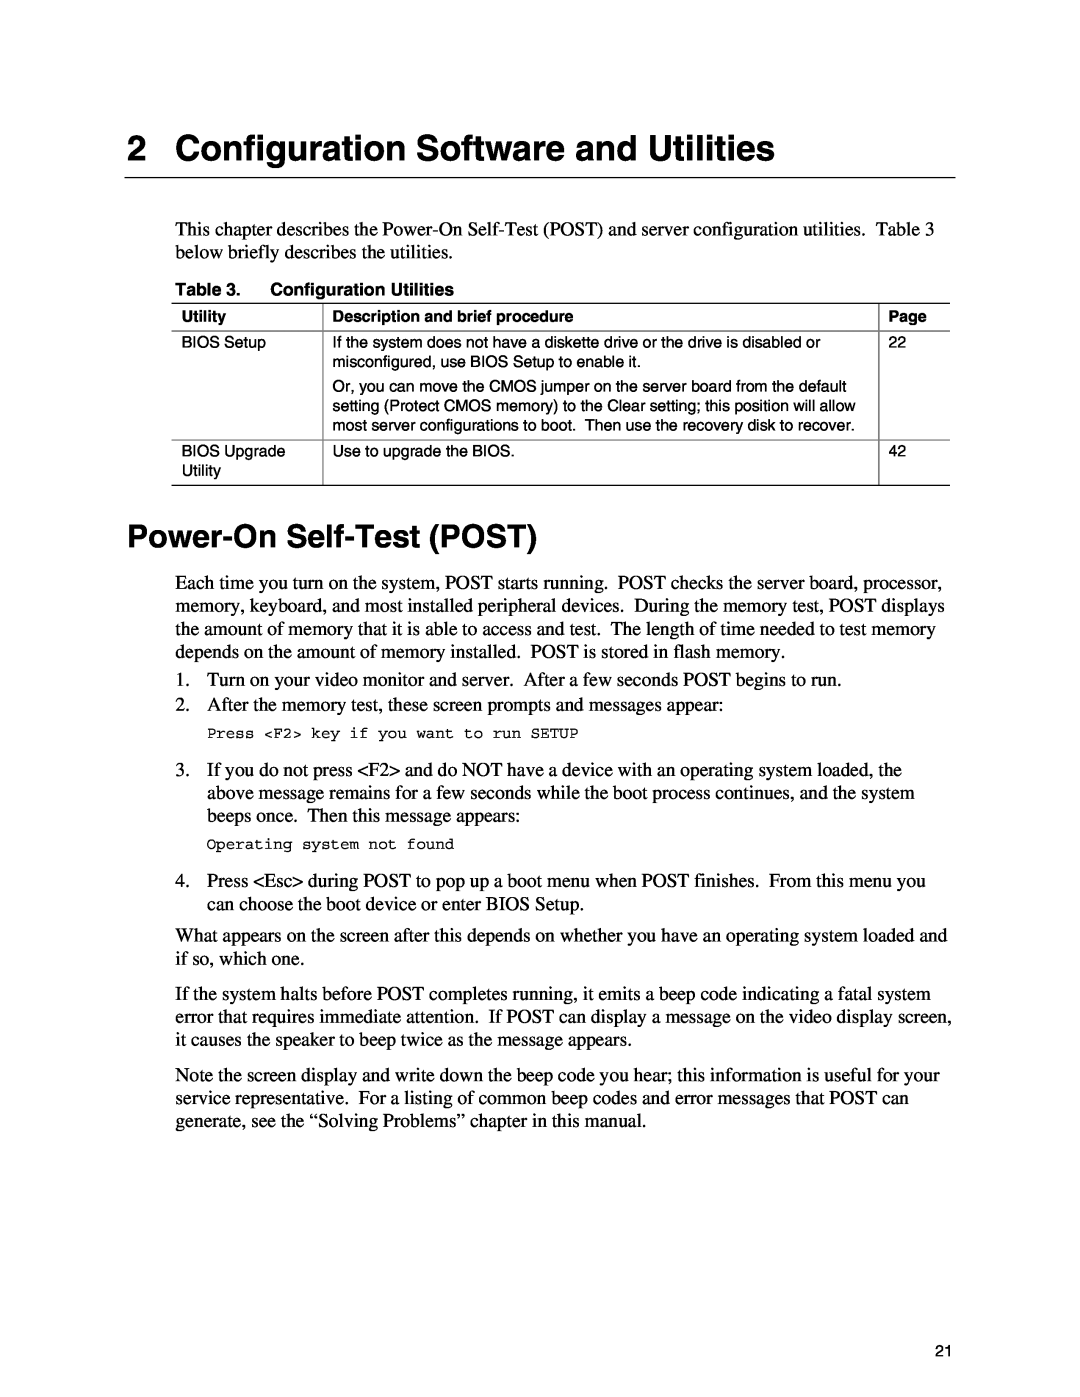 Intel SE7500CW2 manual Configuration Software and Utilities, Power-On Self-TestPOST 